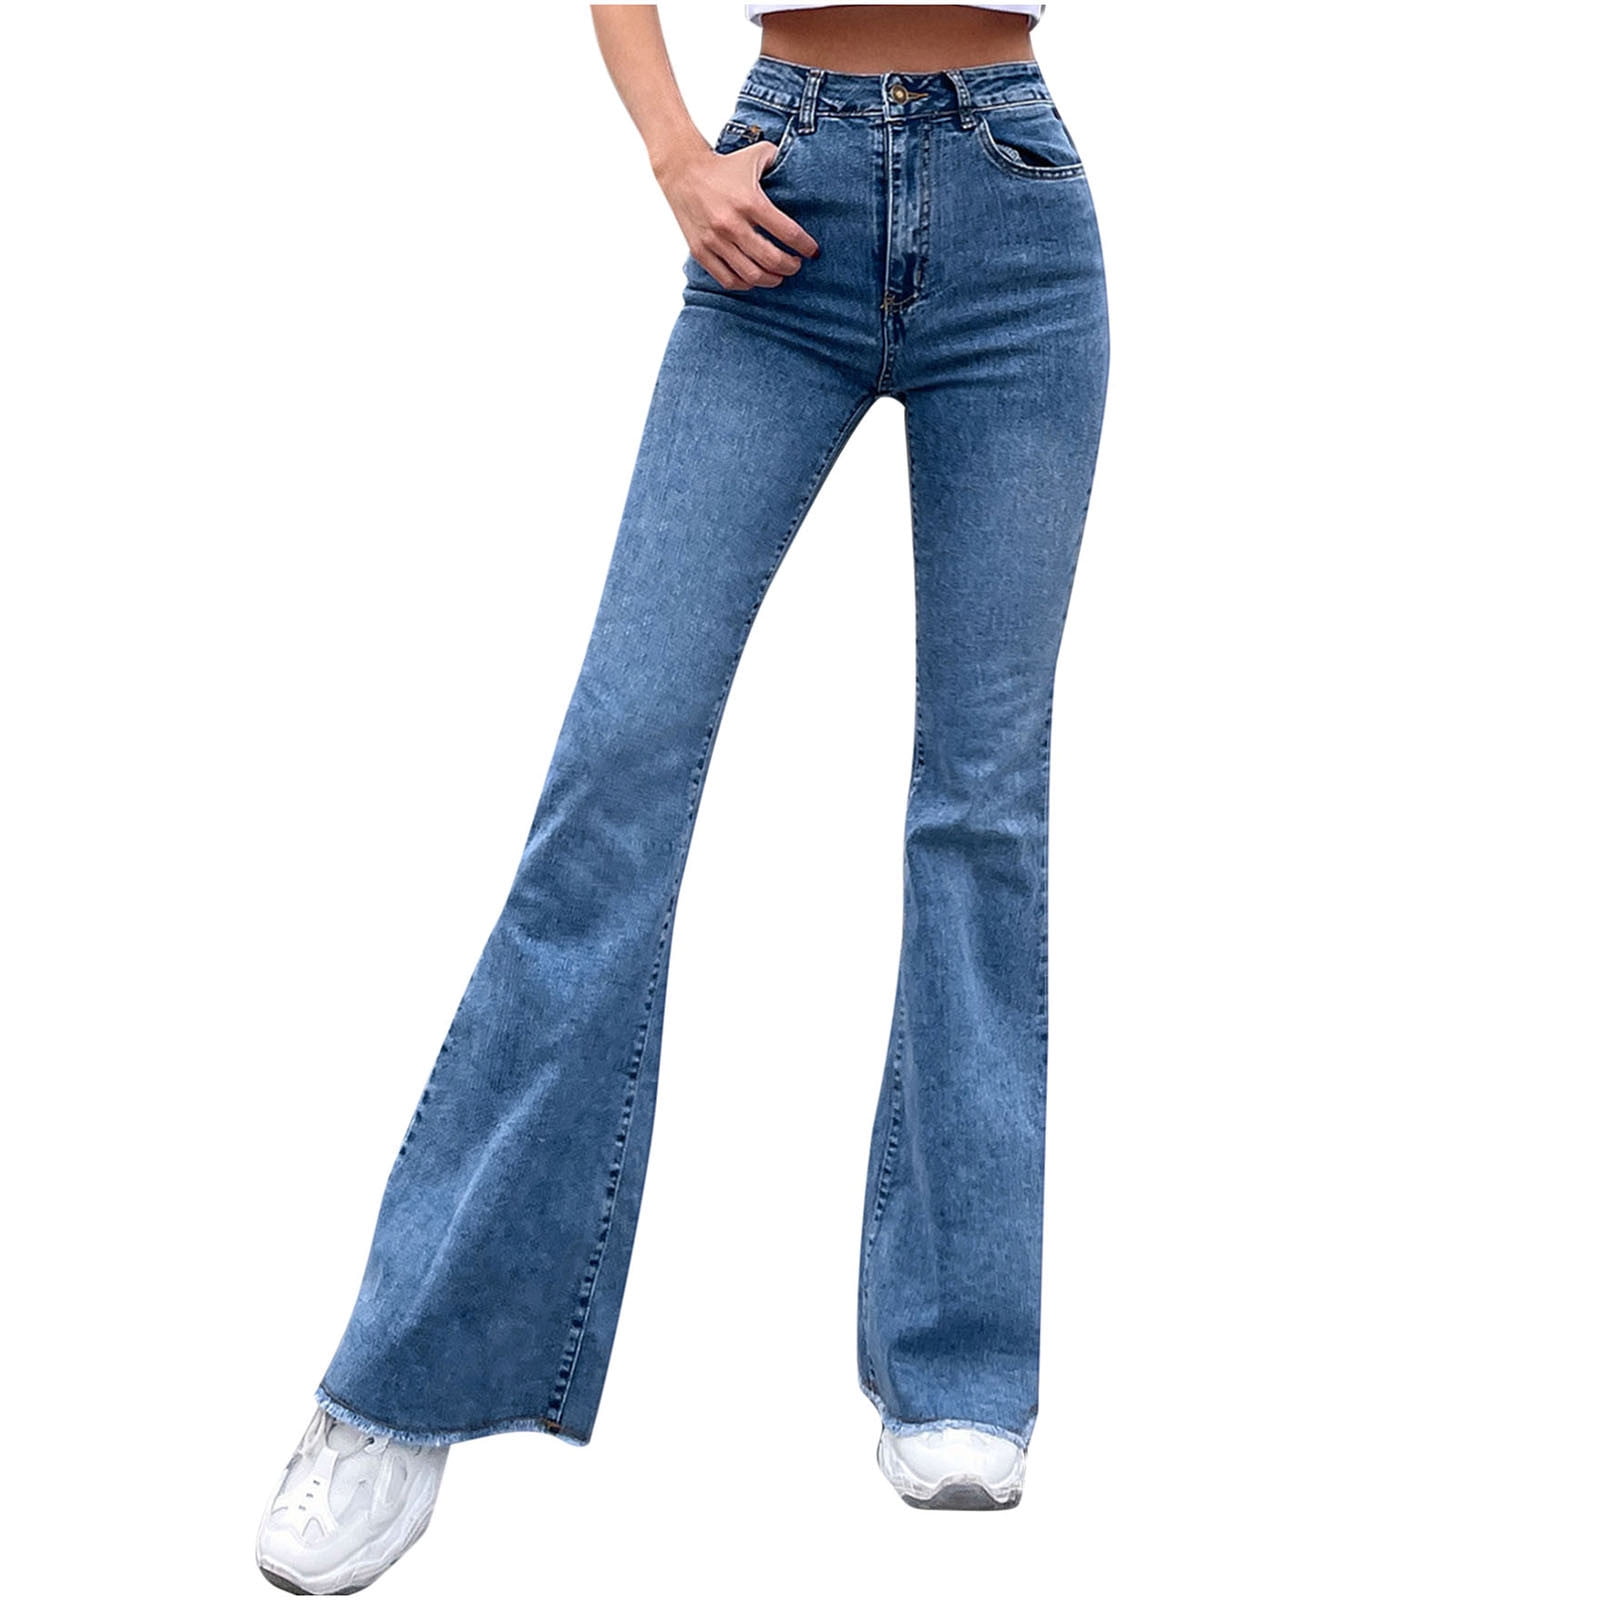 Womens Bell Bottom Jeans High Waist Washed Raw Hem Stretchy